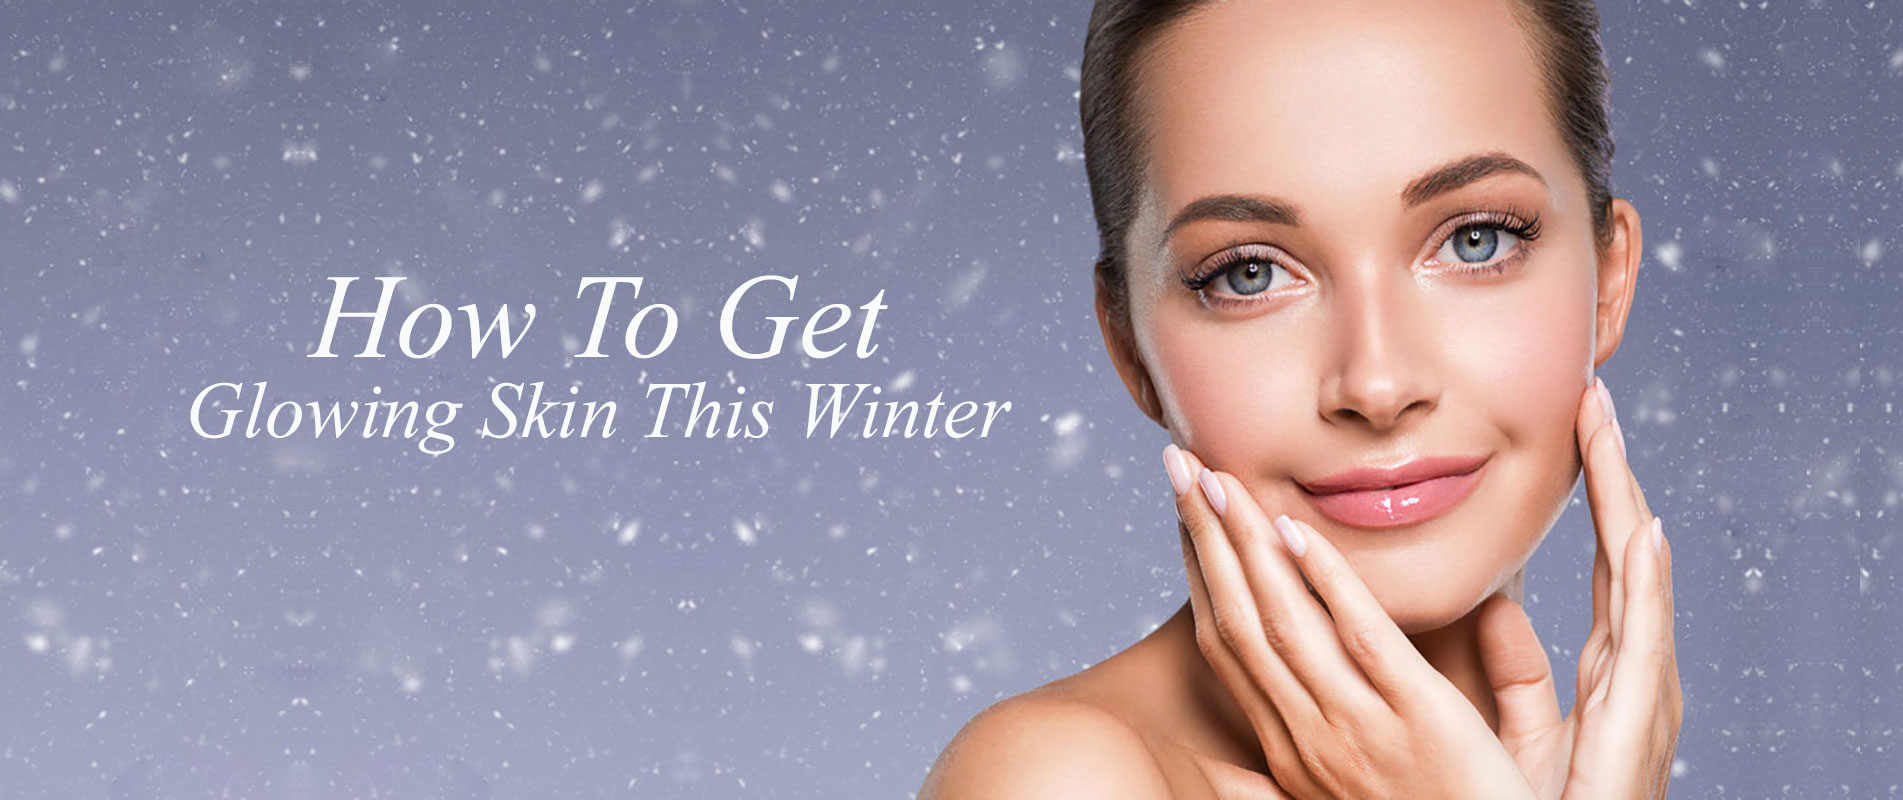 How To Get Glowing Skin This Winter banner 2